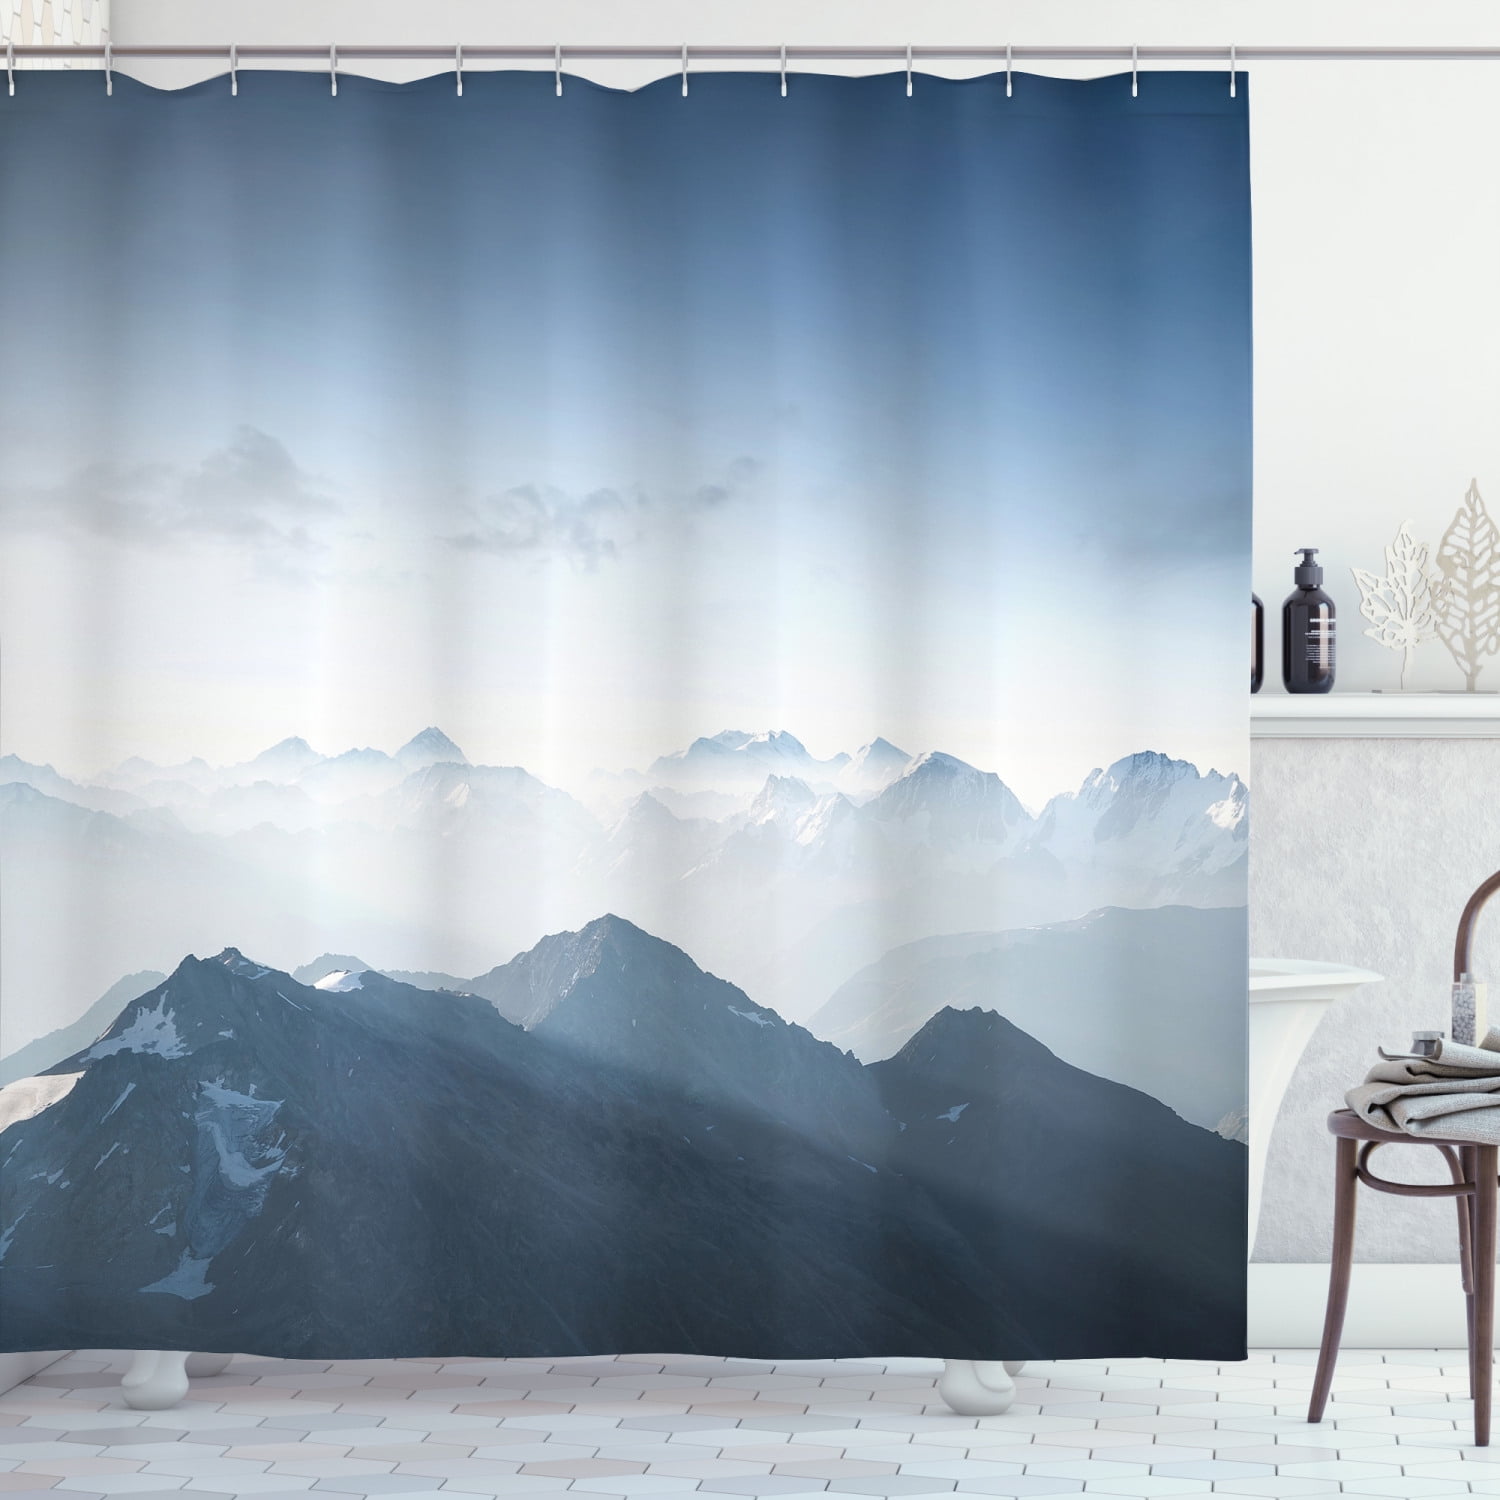 Fog Forest Bathroom Waterproof Polyester Fabric Shower Curtain Set 71Inches LONG 